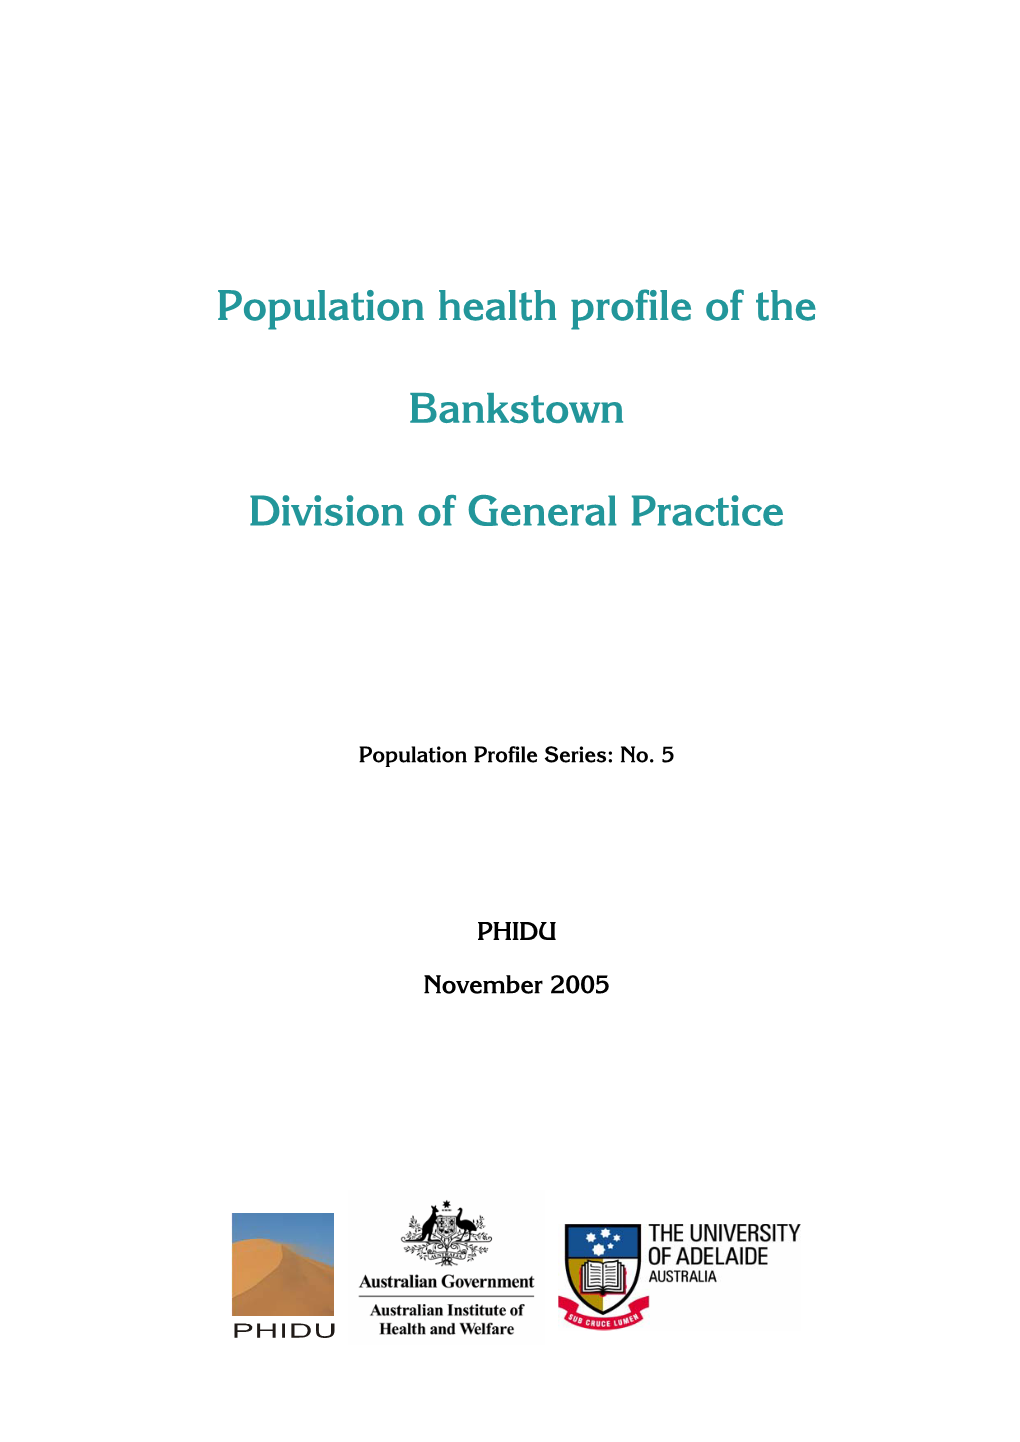 Population Health Profile of the Bankstown Division of General Practice